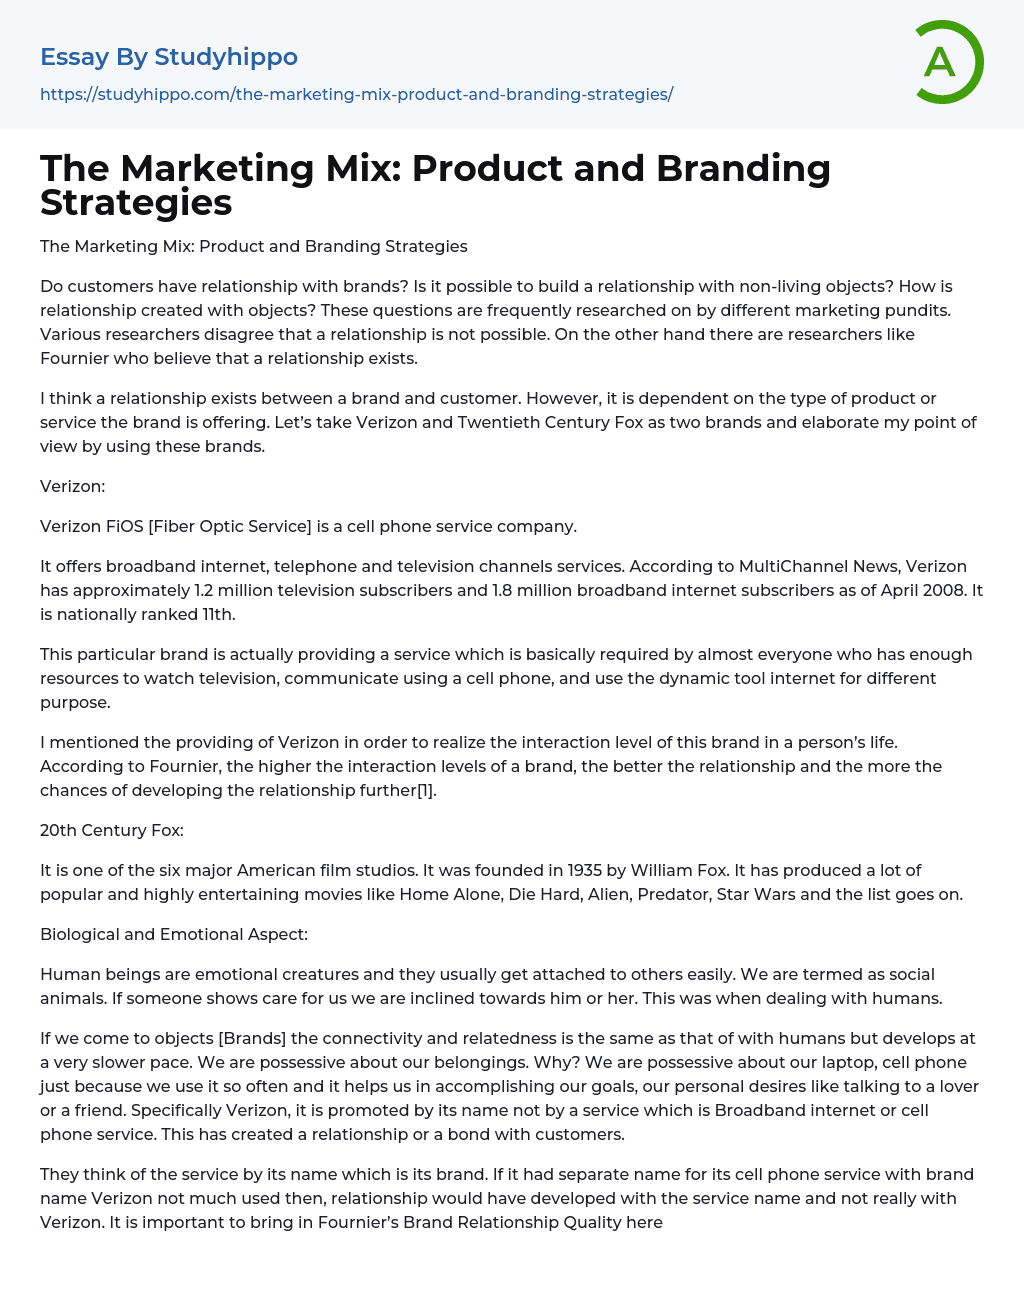 The Marketing Mix: Product and Branding Strategies Essay Example